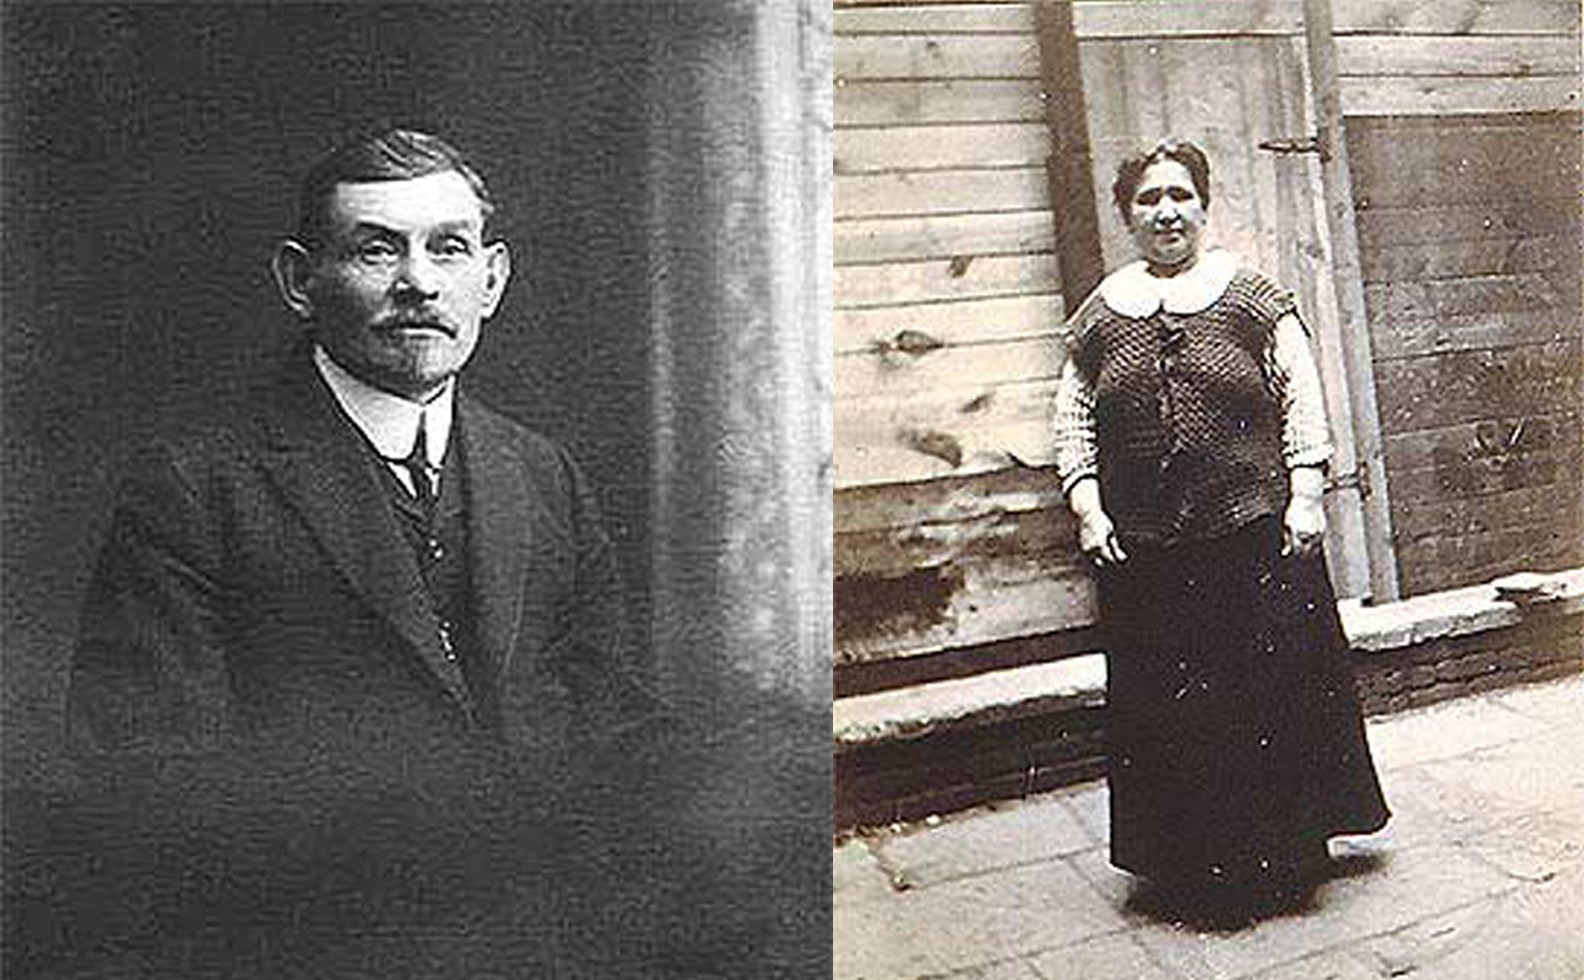 Side by side, black and white portraits of Abe Rogarshevsky on the left and Fannie Rogarshevsky standing in front of a door on the right